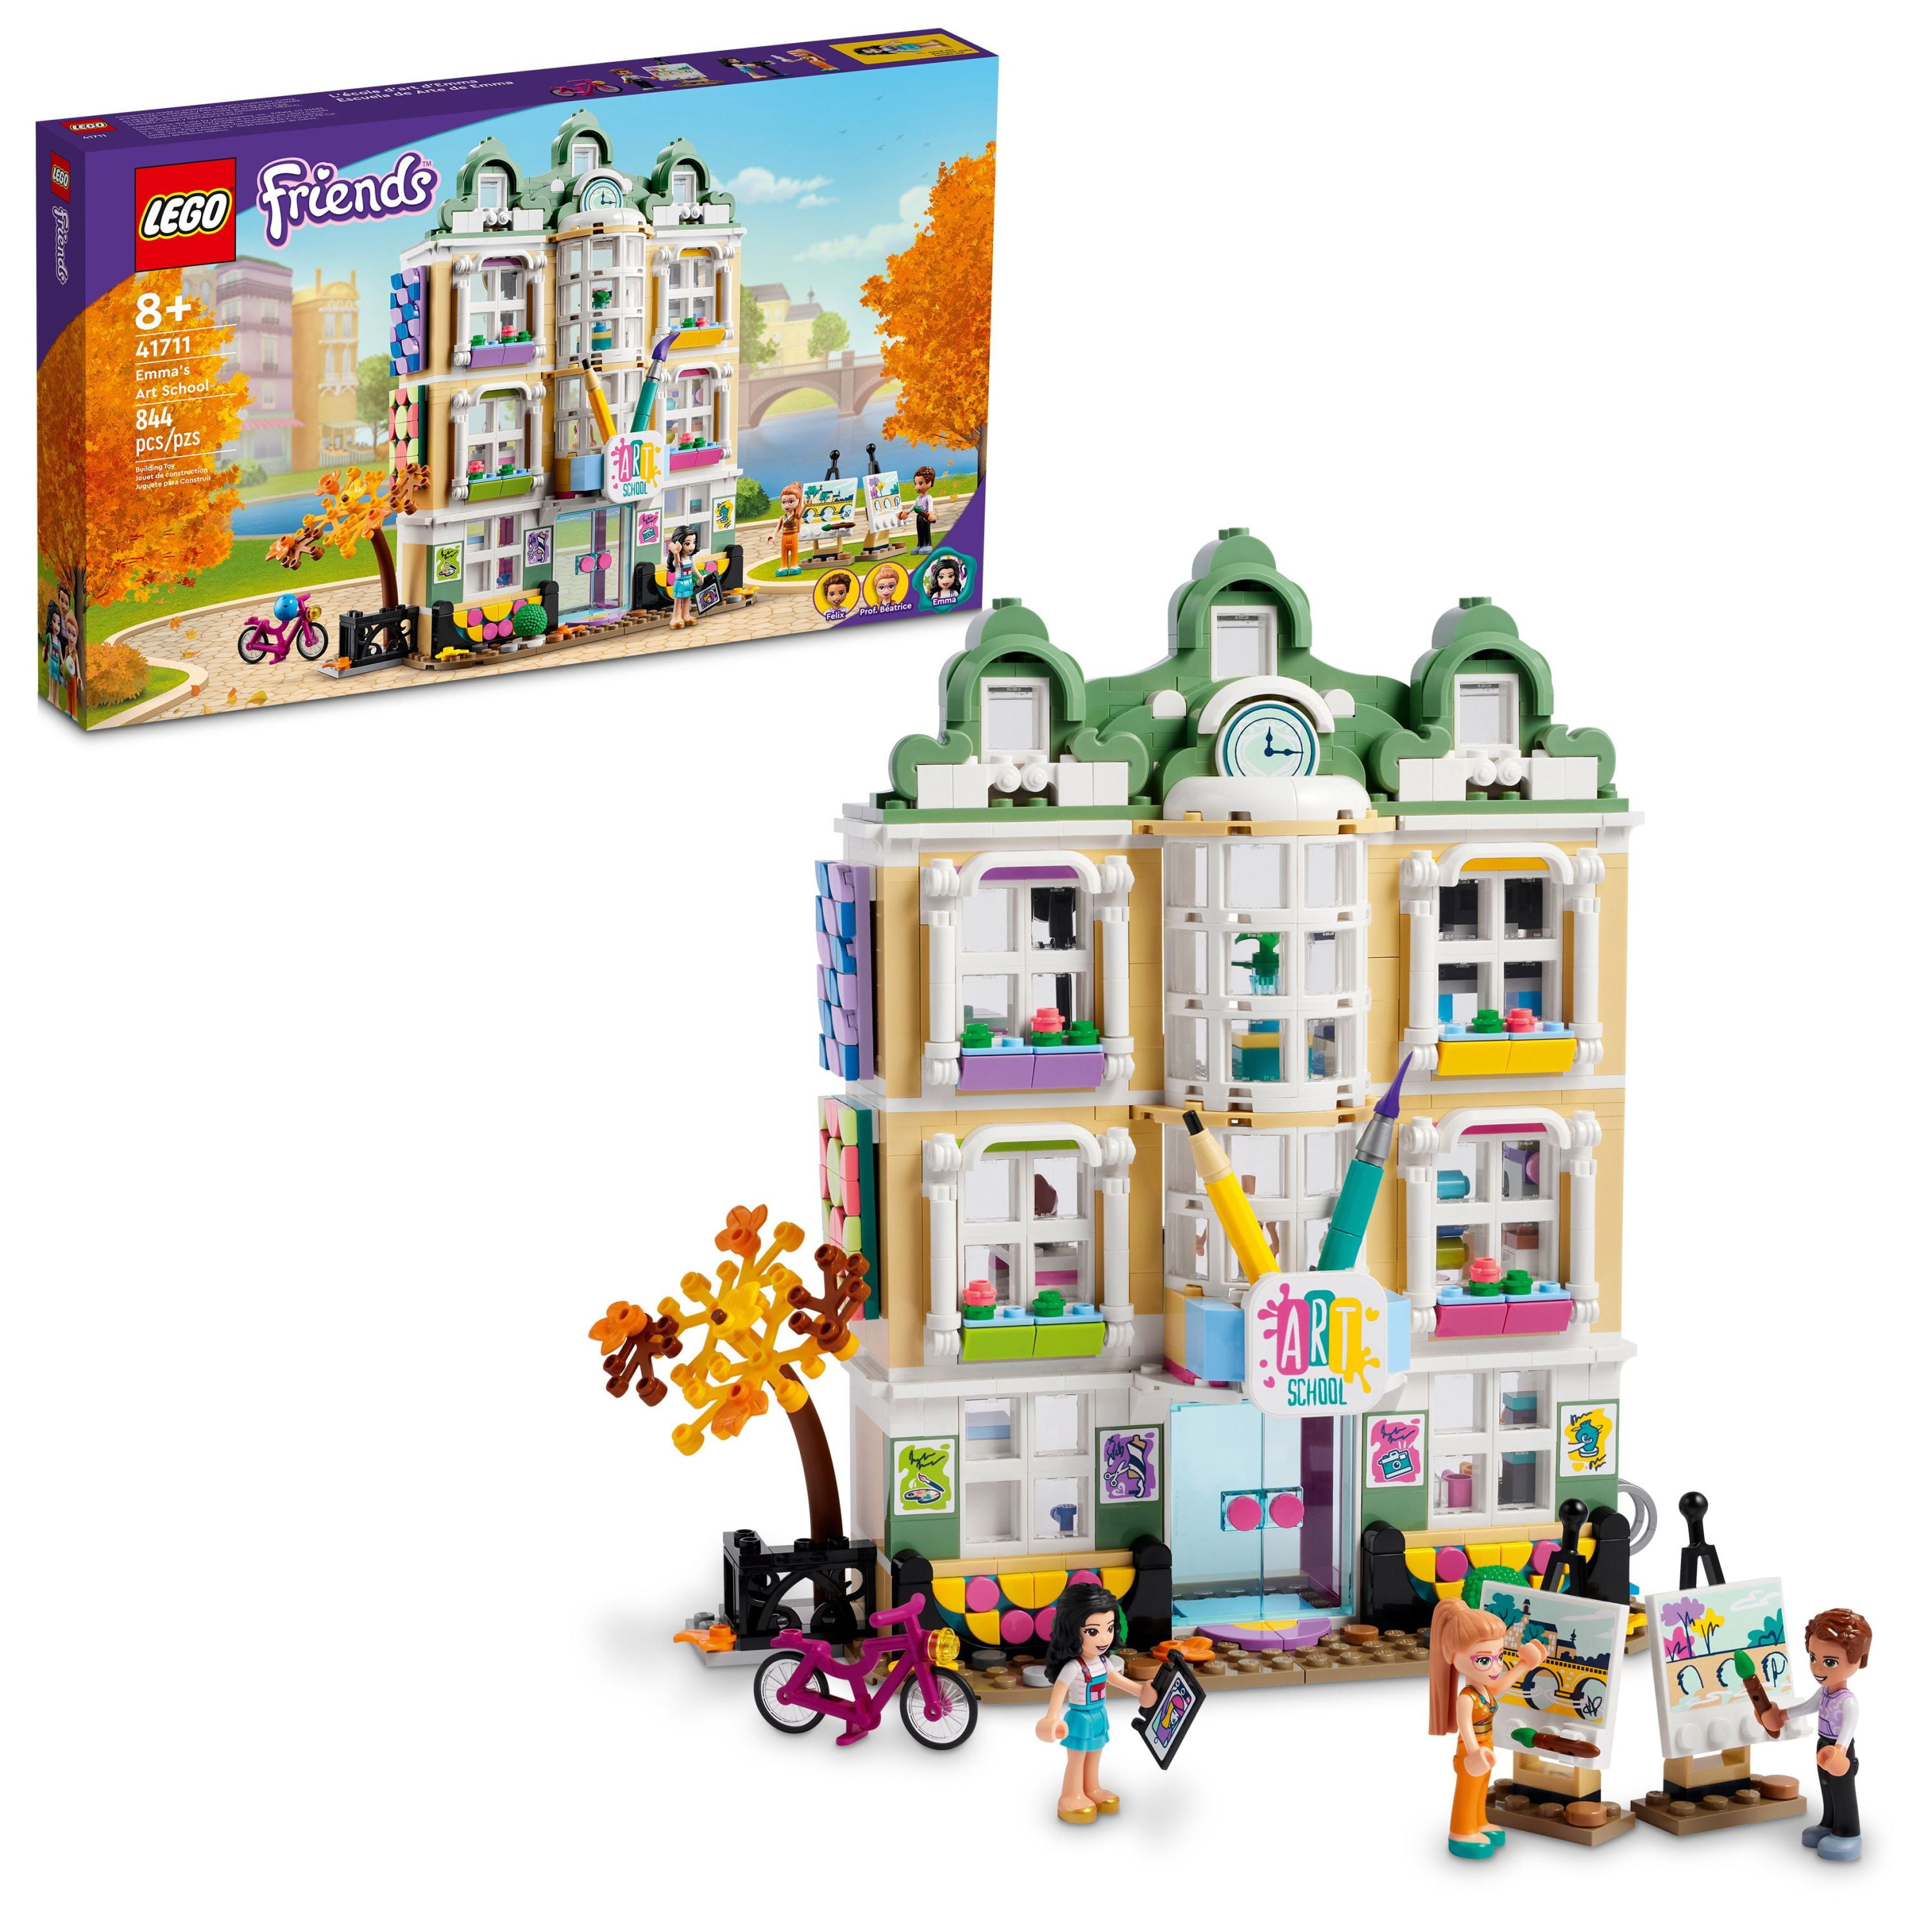 4 Mini Toy Figures Girls Friends House Building Kit for Kids Age 6-12 BRICK STORY Dream Girls Friends Shopping Mall Building Set 808 Pieces with Supermarket and Restaurant Building Blocks Toys 